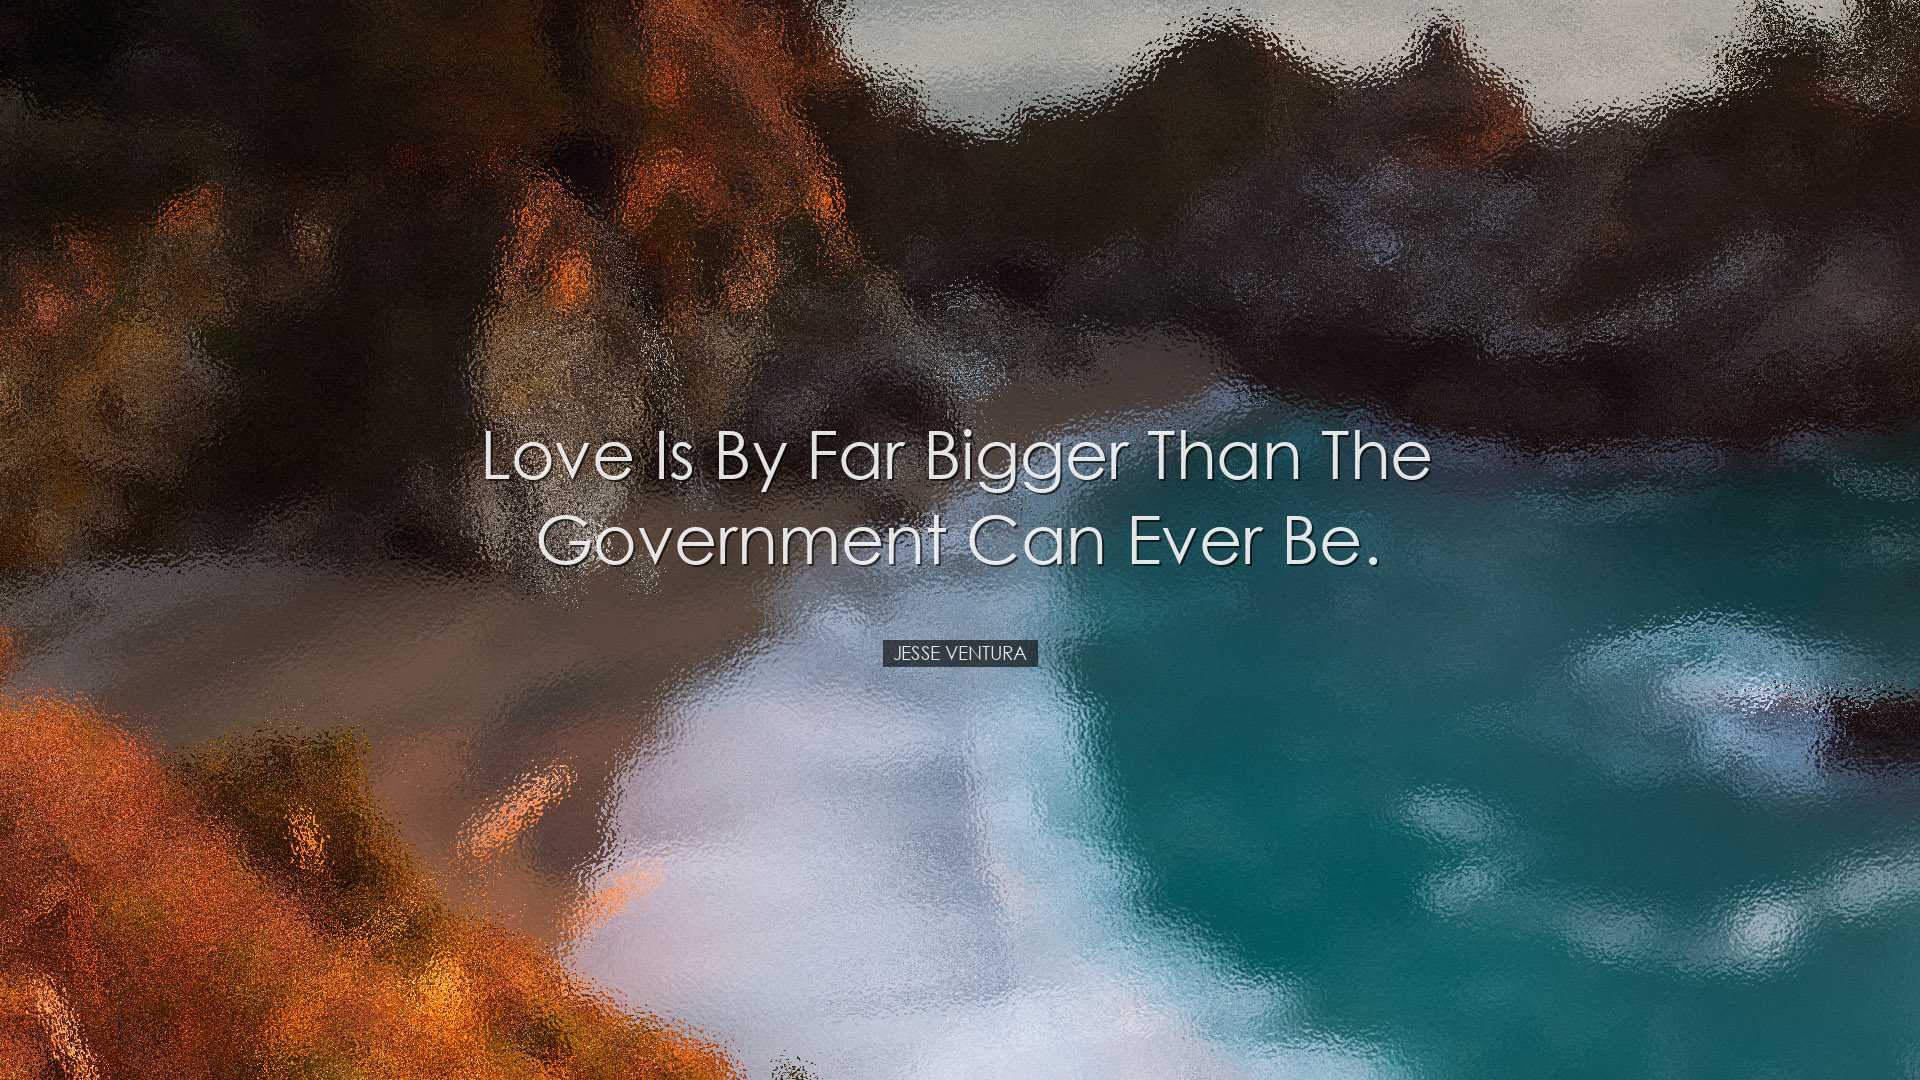 Love is by far bigger than the government can ever be. - Jesse Ven